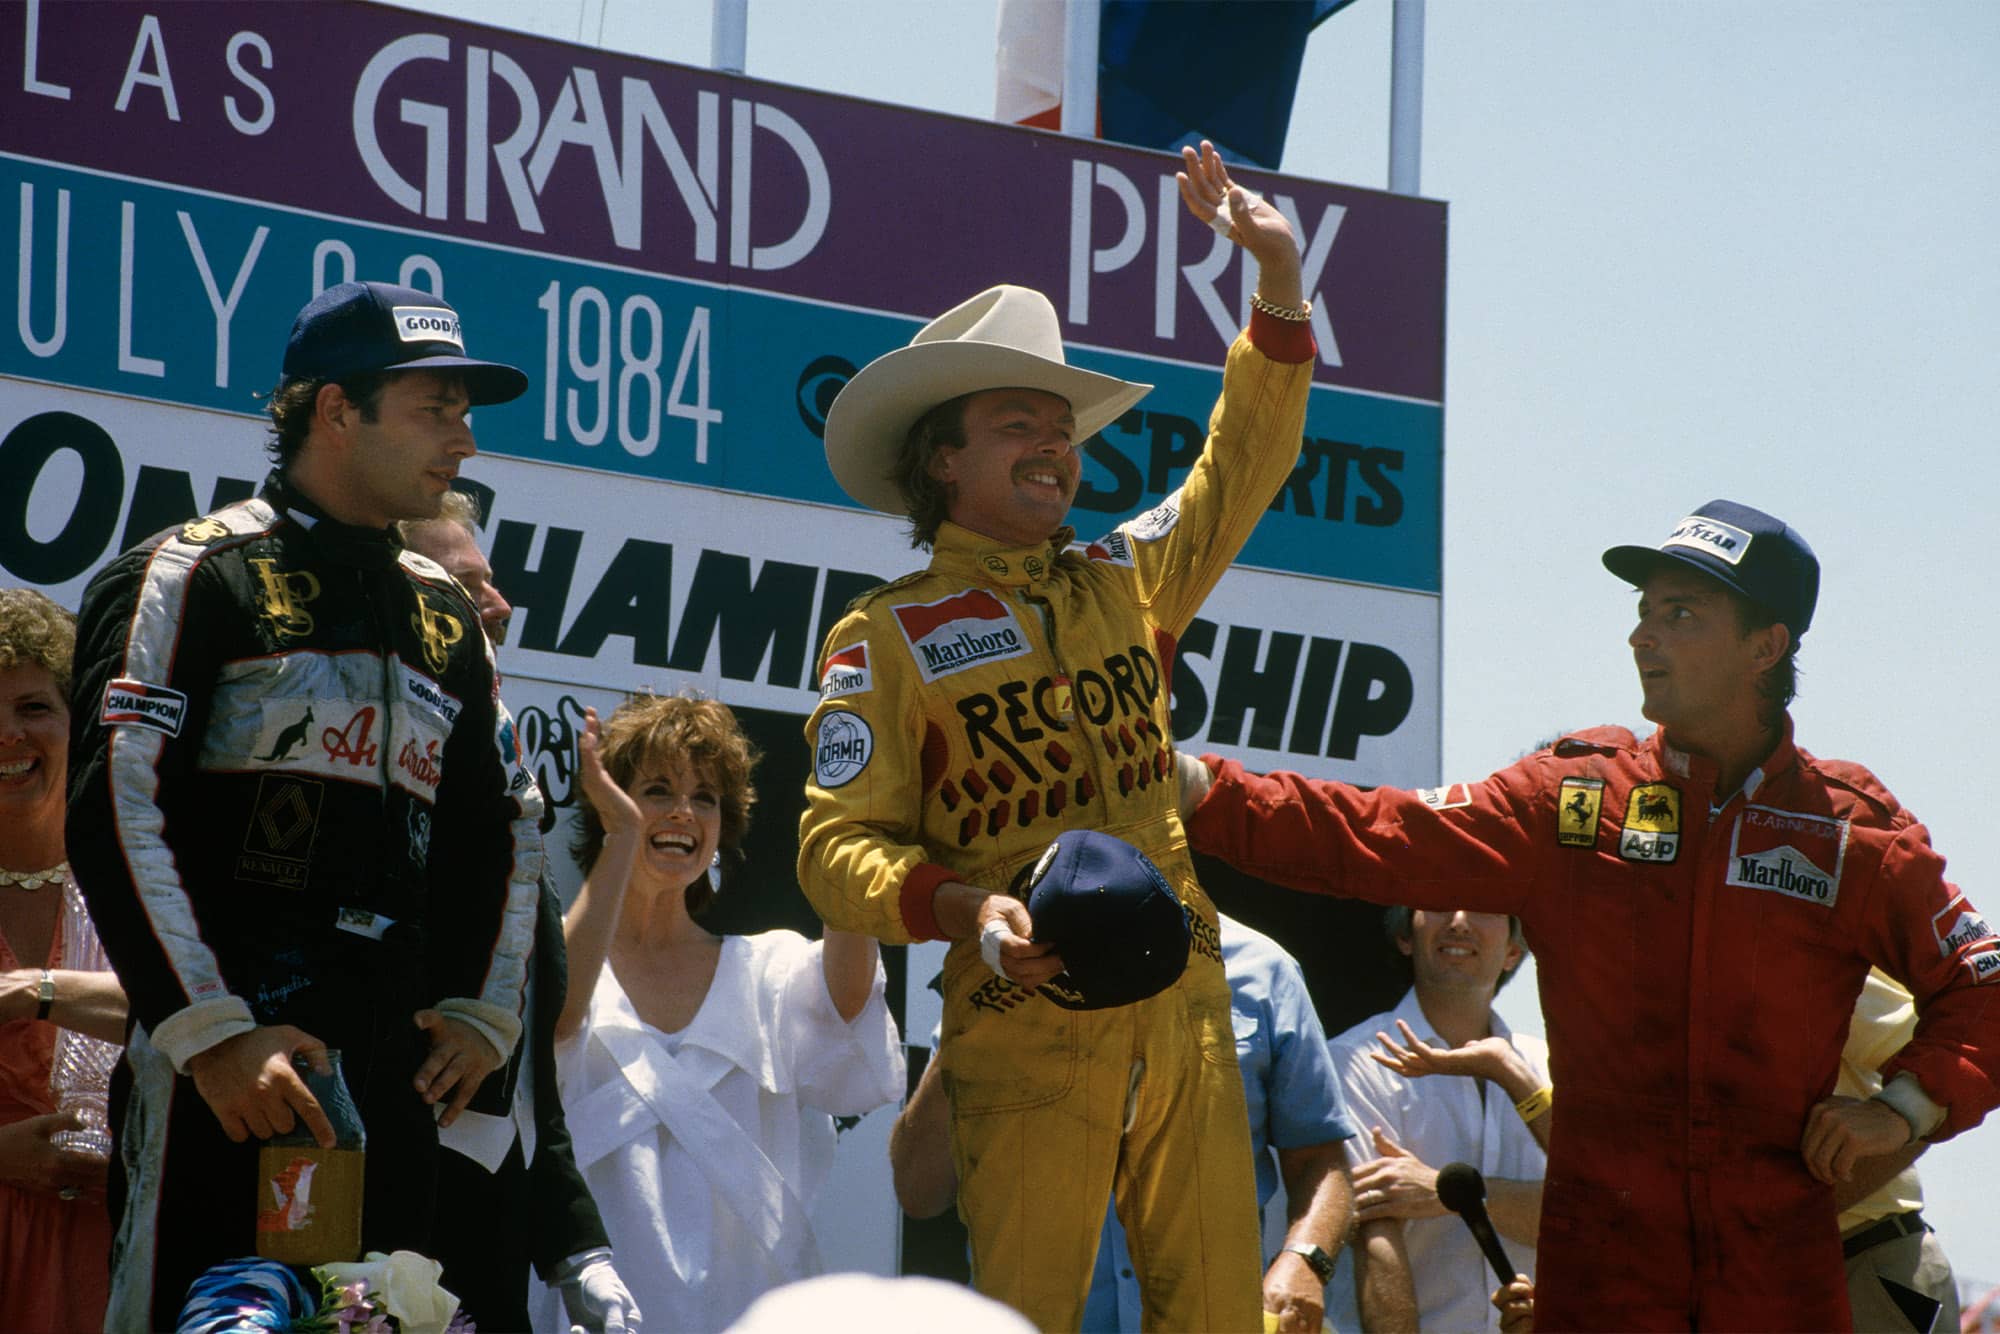 Keke Rosberg stands atop the podium after winning the 1984 Dallas Grand Prix